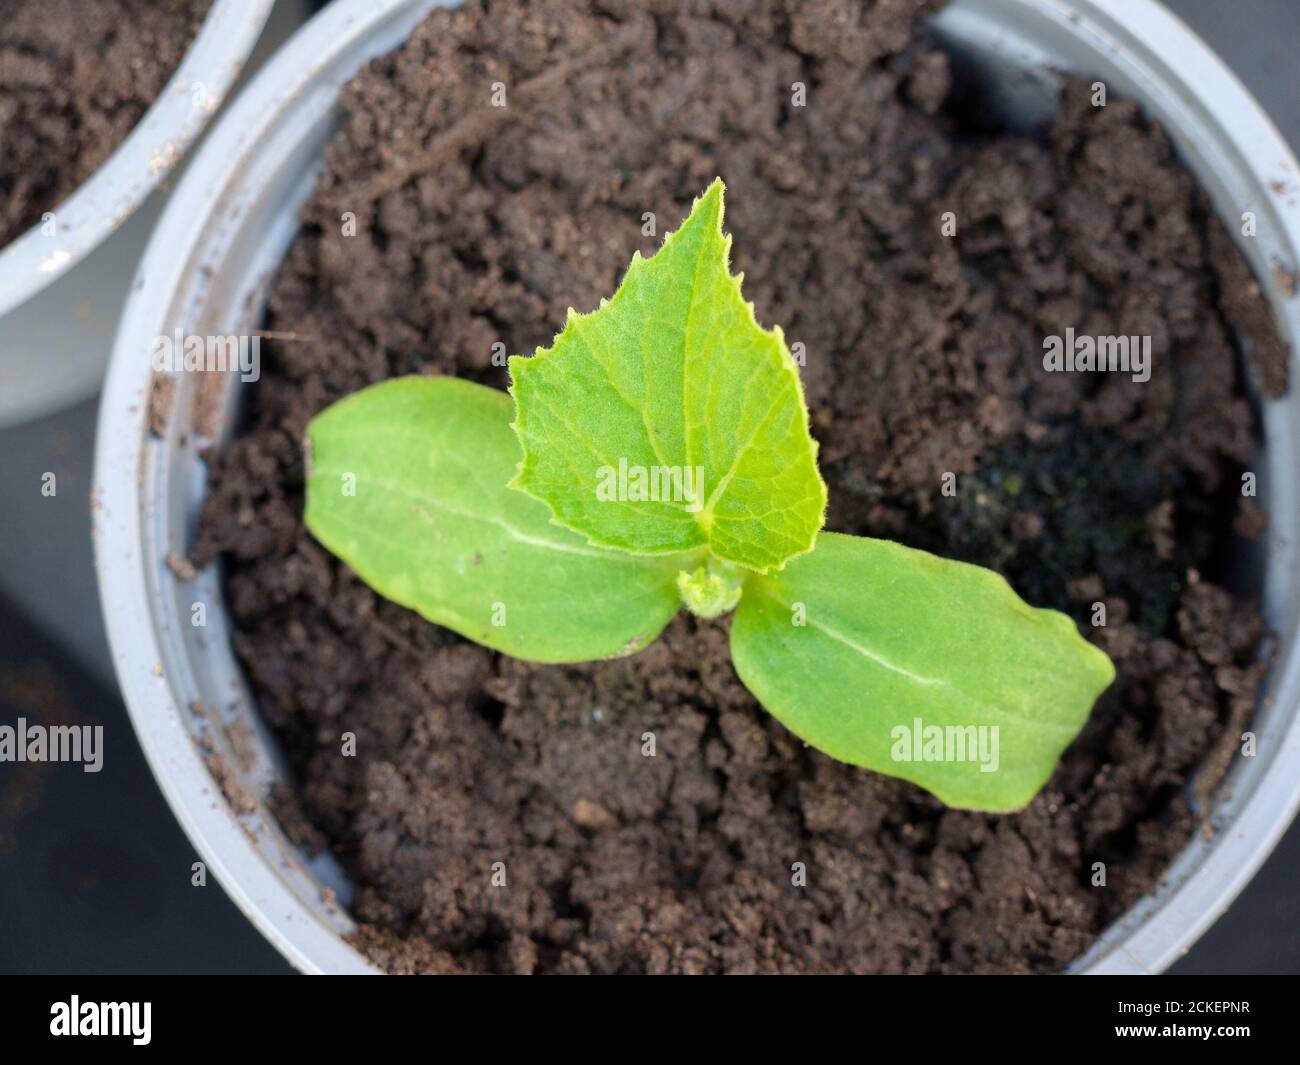 Cucumber (Cucumis sativus) seedling growing in compost filled pots in an amateur gardener’s greenhouse in spring. Stock Photo